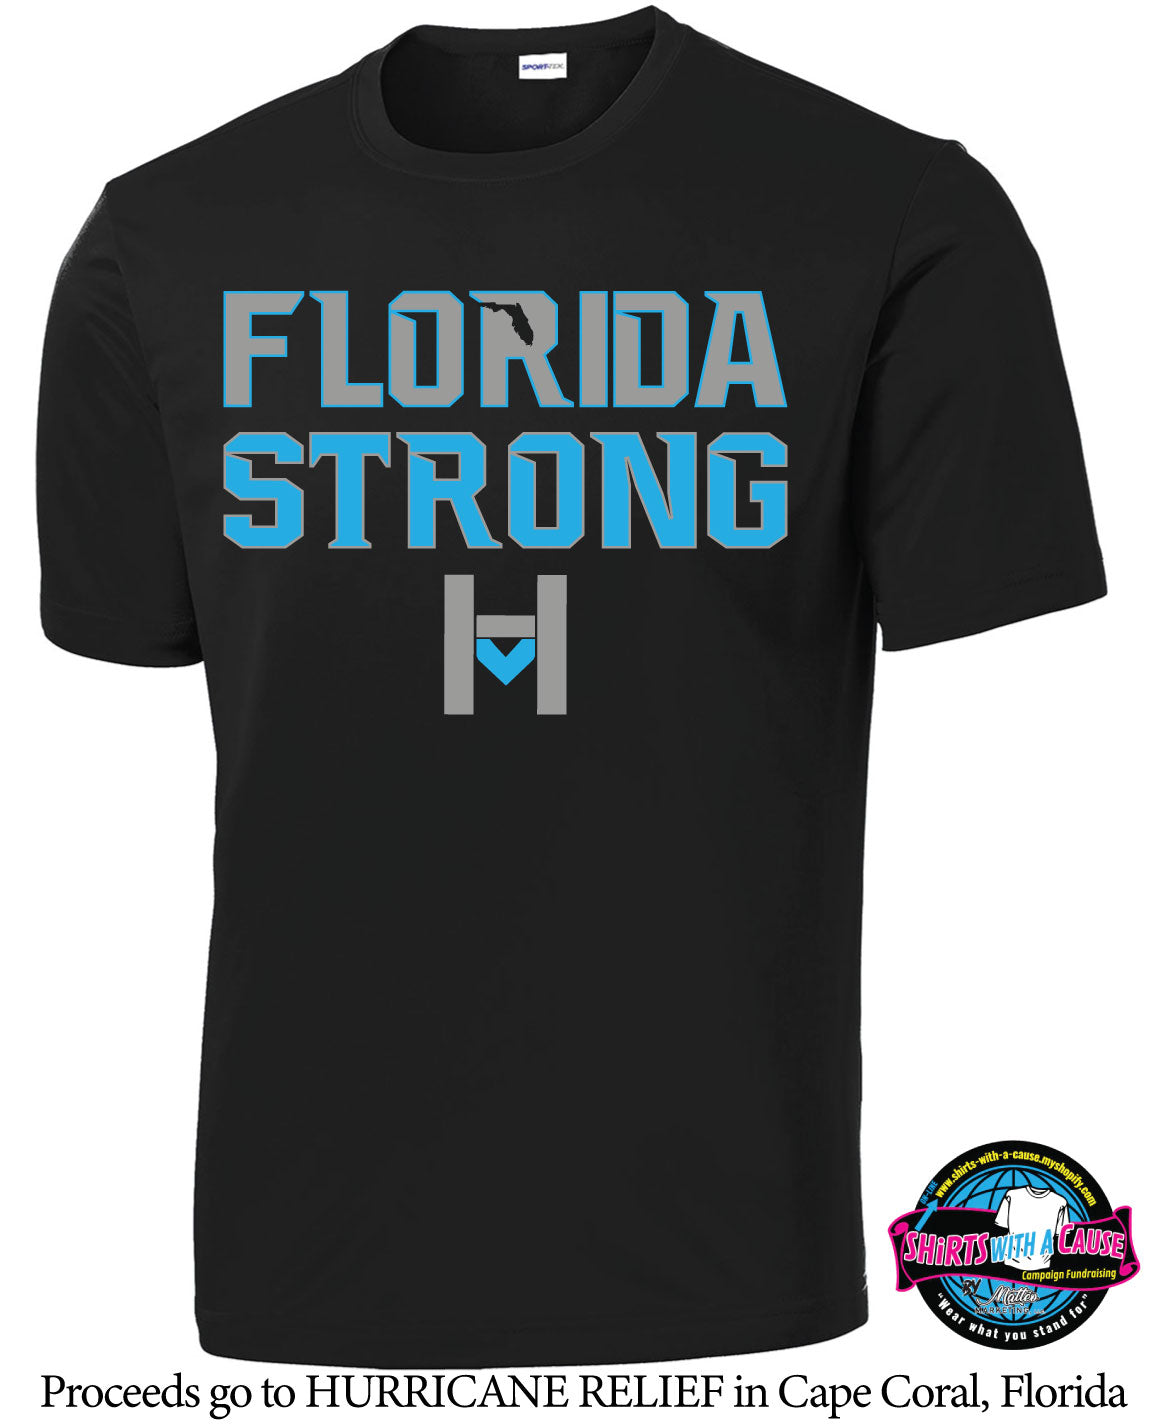 Florida Strong Hoops on Mission